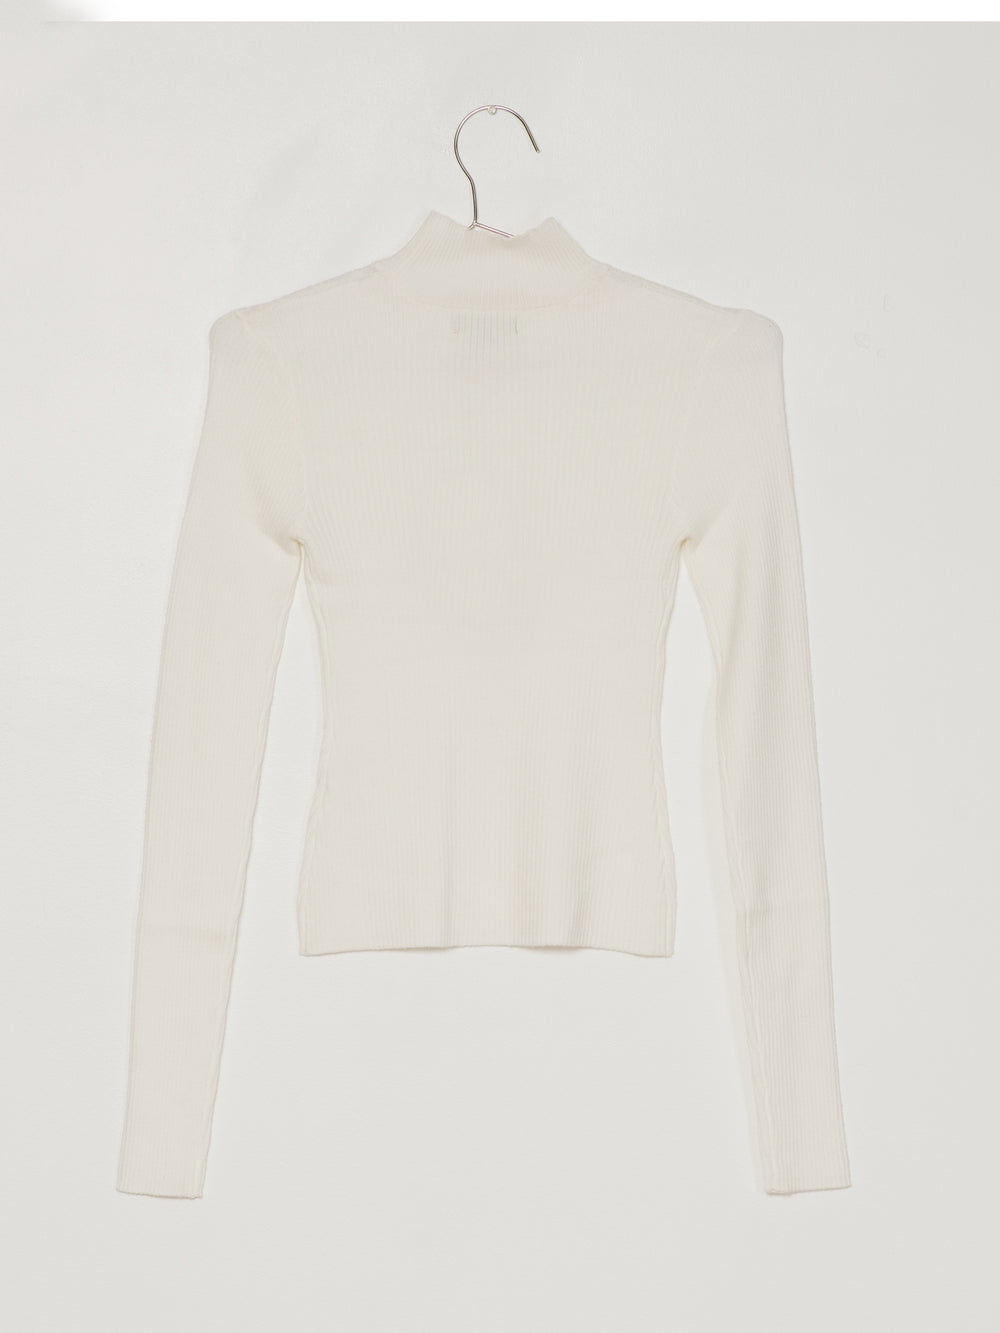 WOMENS REESE MOCKNECK - CLEARANCE